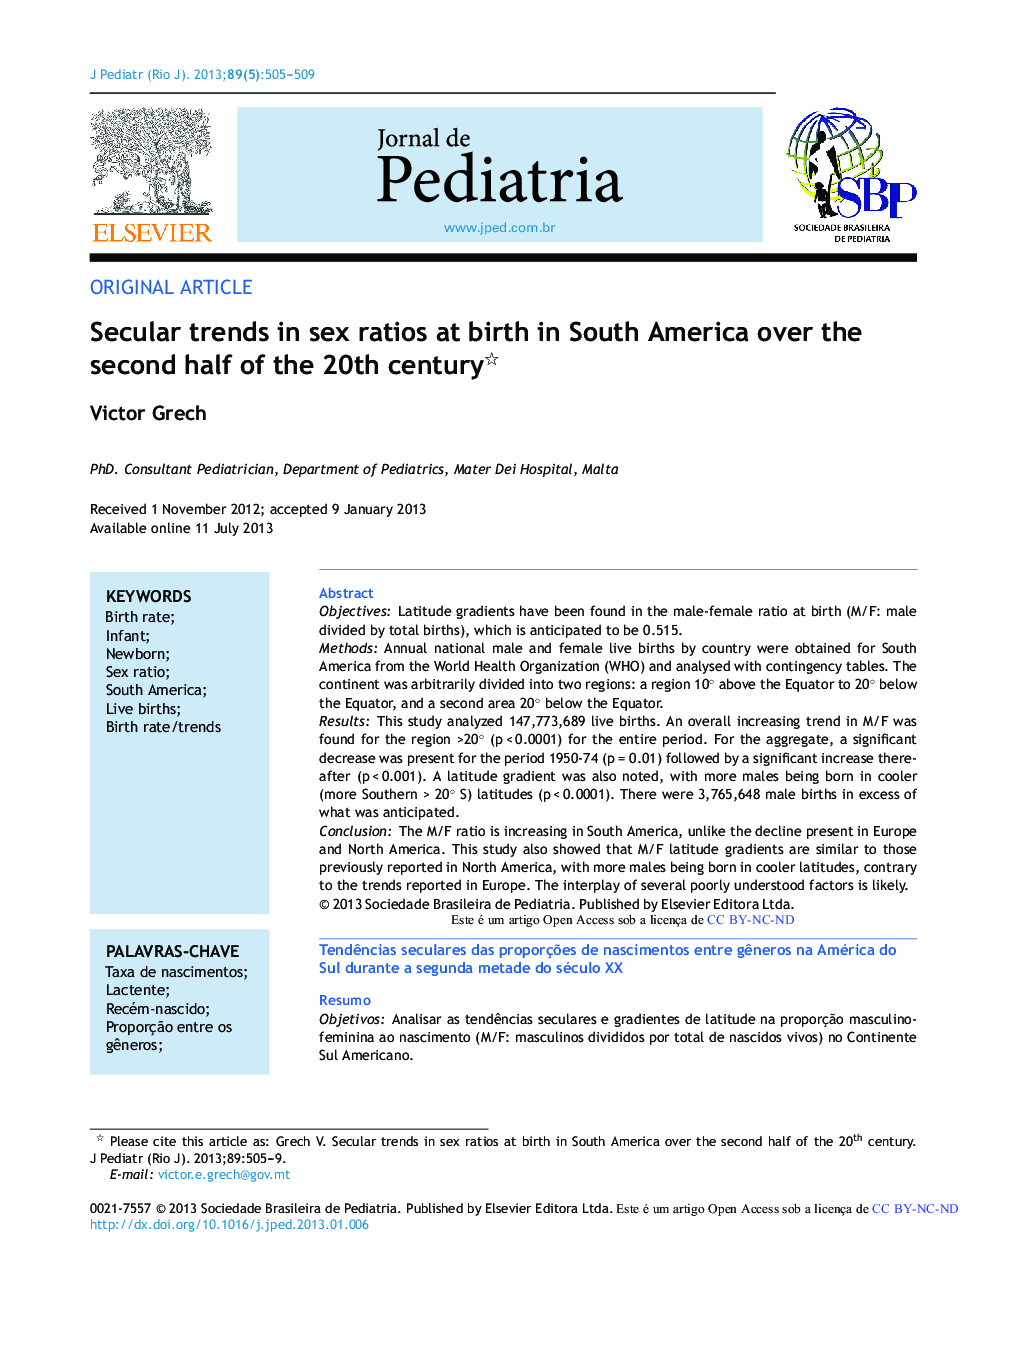 Secular trends in sex ratios at birth in South America over the second half of the 20th century 